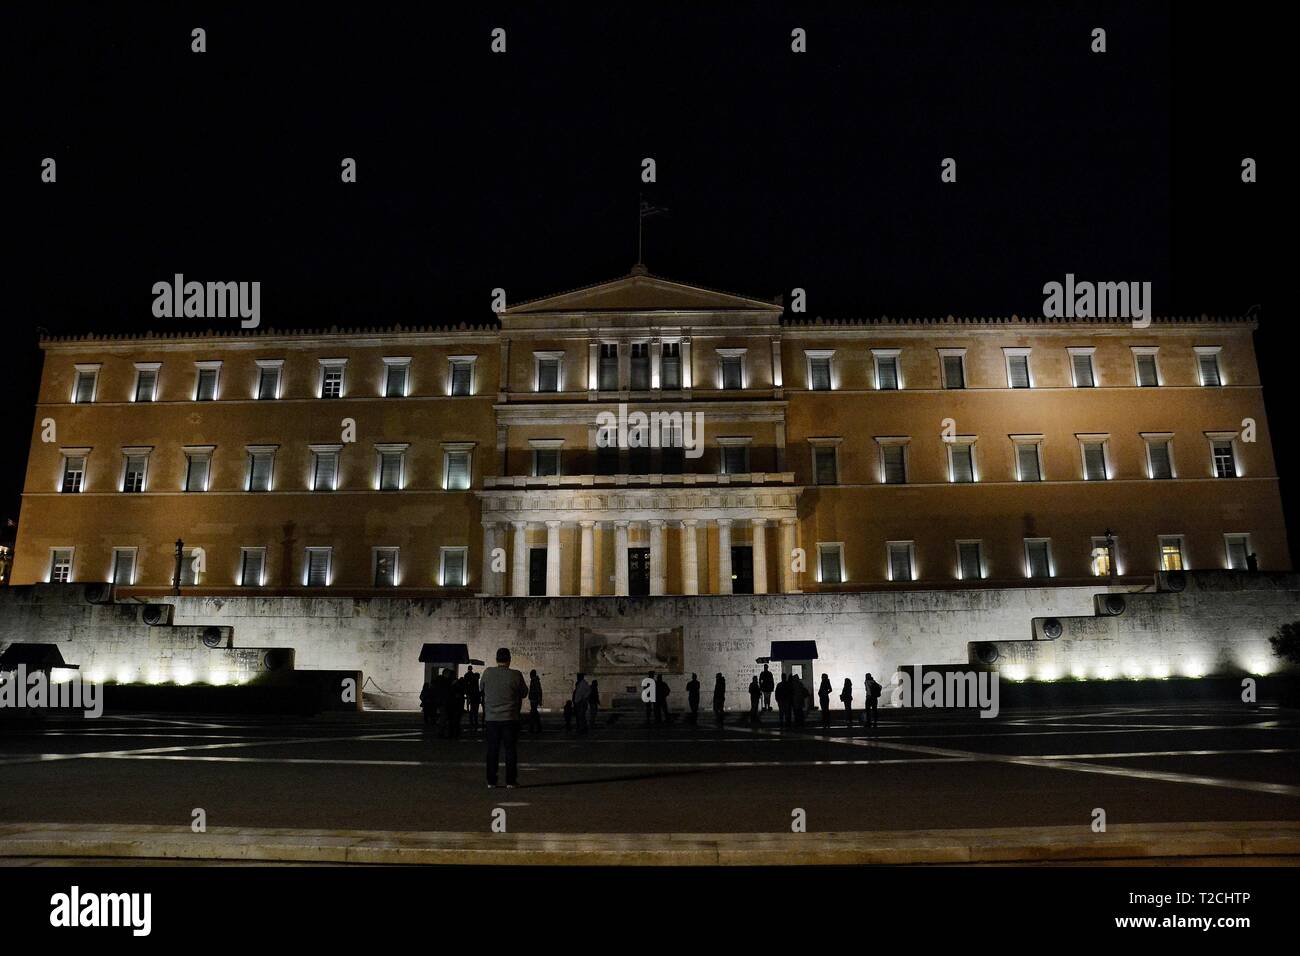 Athens, Greece. 30th Mar, Greek Parliament seen a minutes before the Earth Hour 2019.Earth Hour is a worldwide movement organized by the World Wide Fund for Nature (WWF). The event